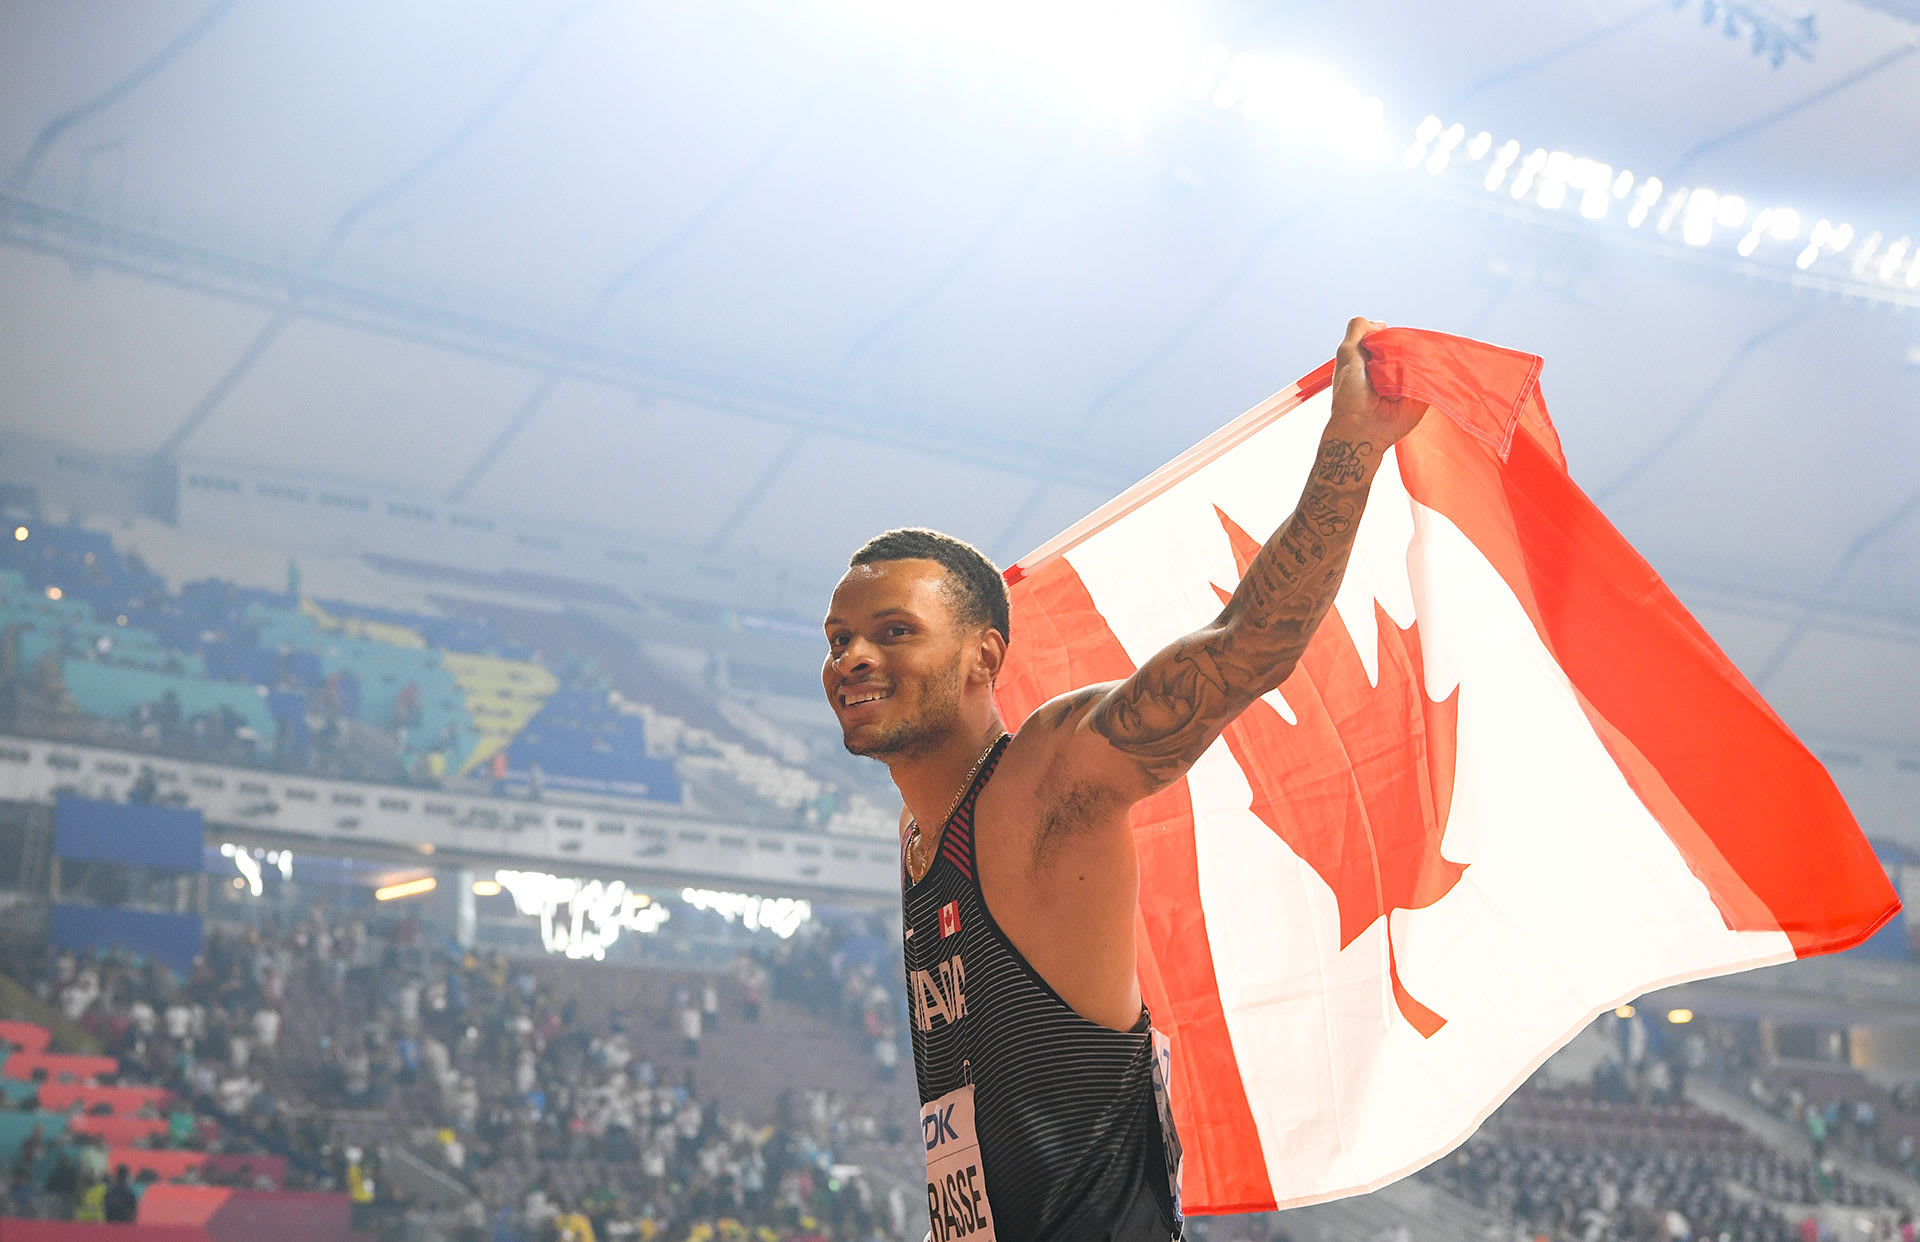 Andre De Grasse carries the Canadian flag after a race